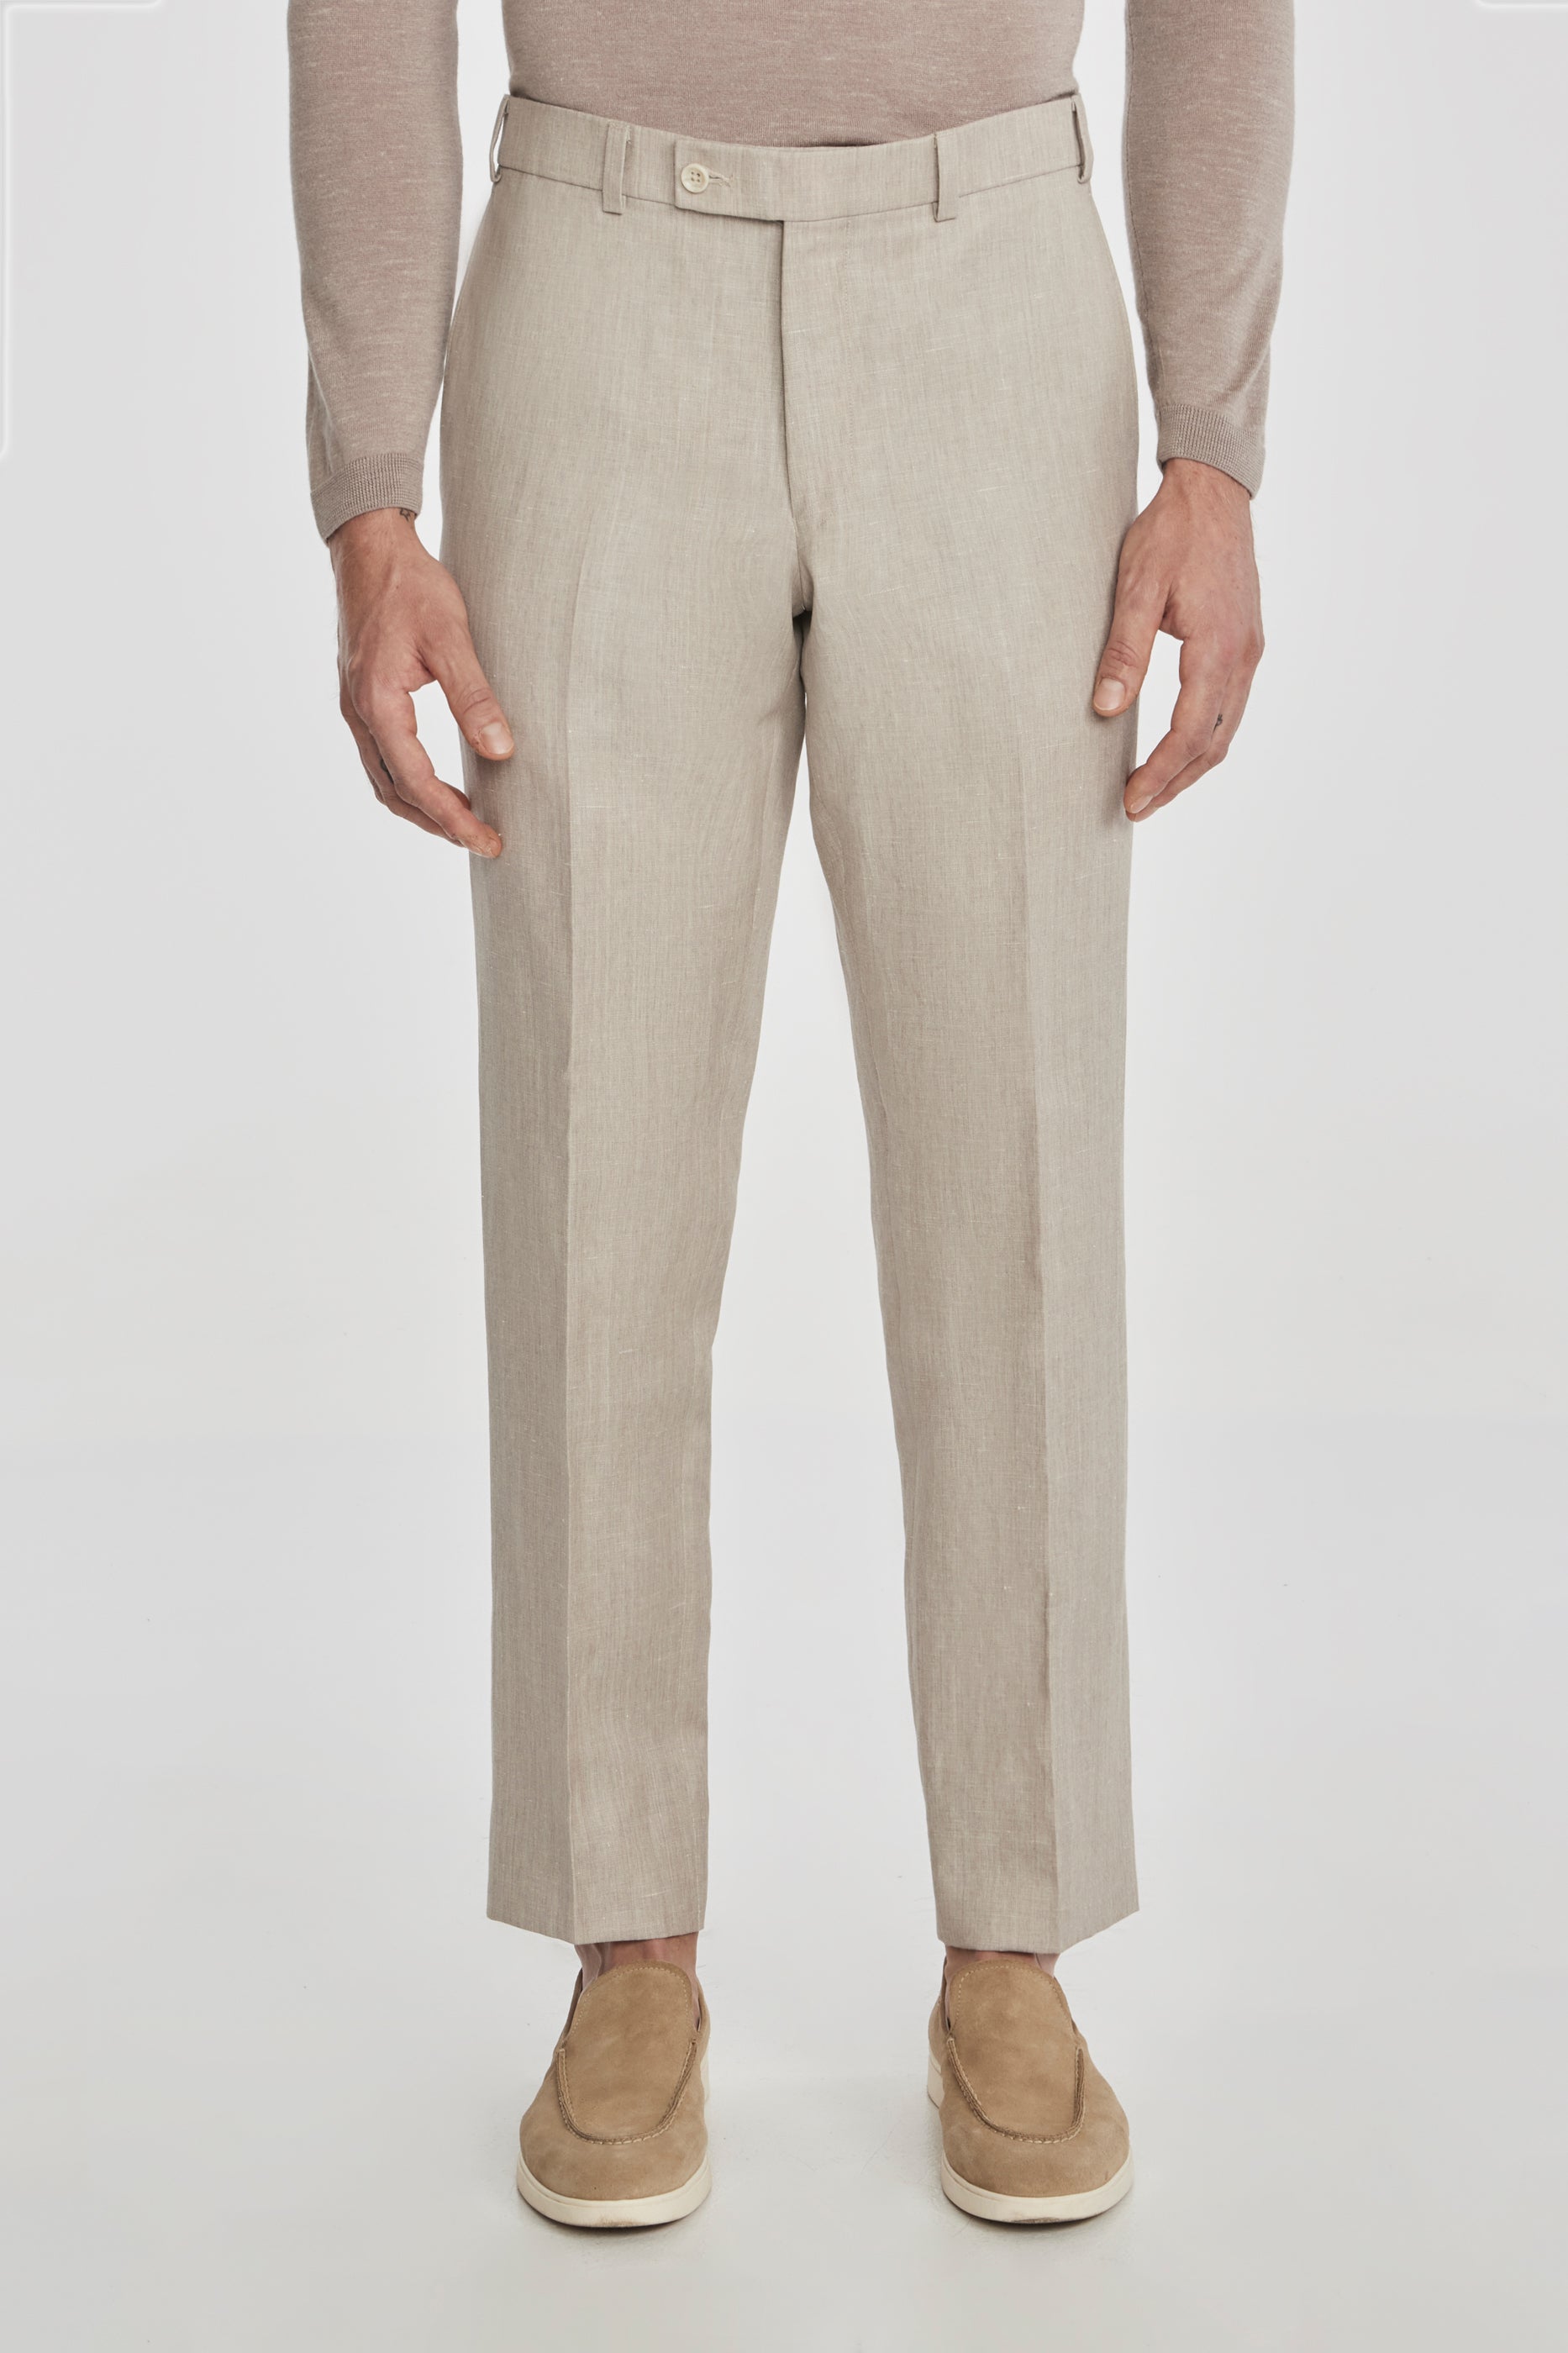 Alt view Pablo Wool and Linen Tailored Trouser in Tan